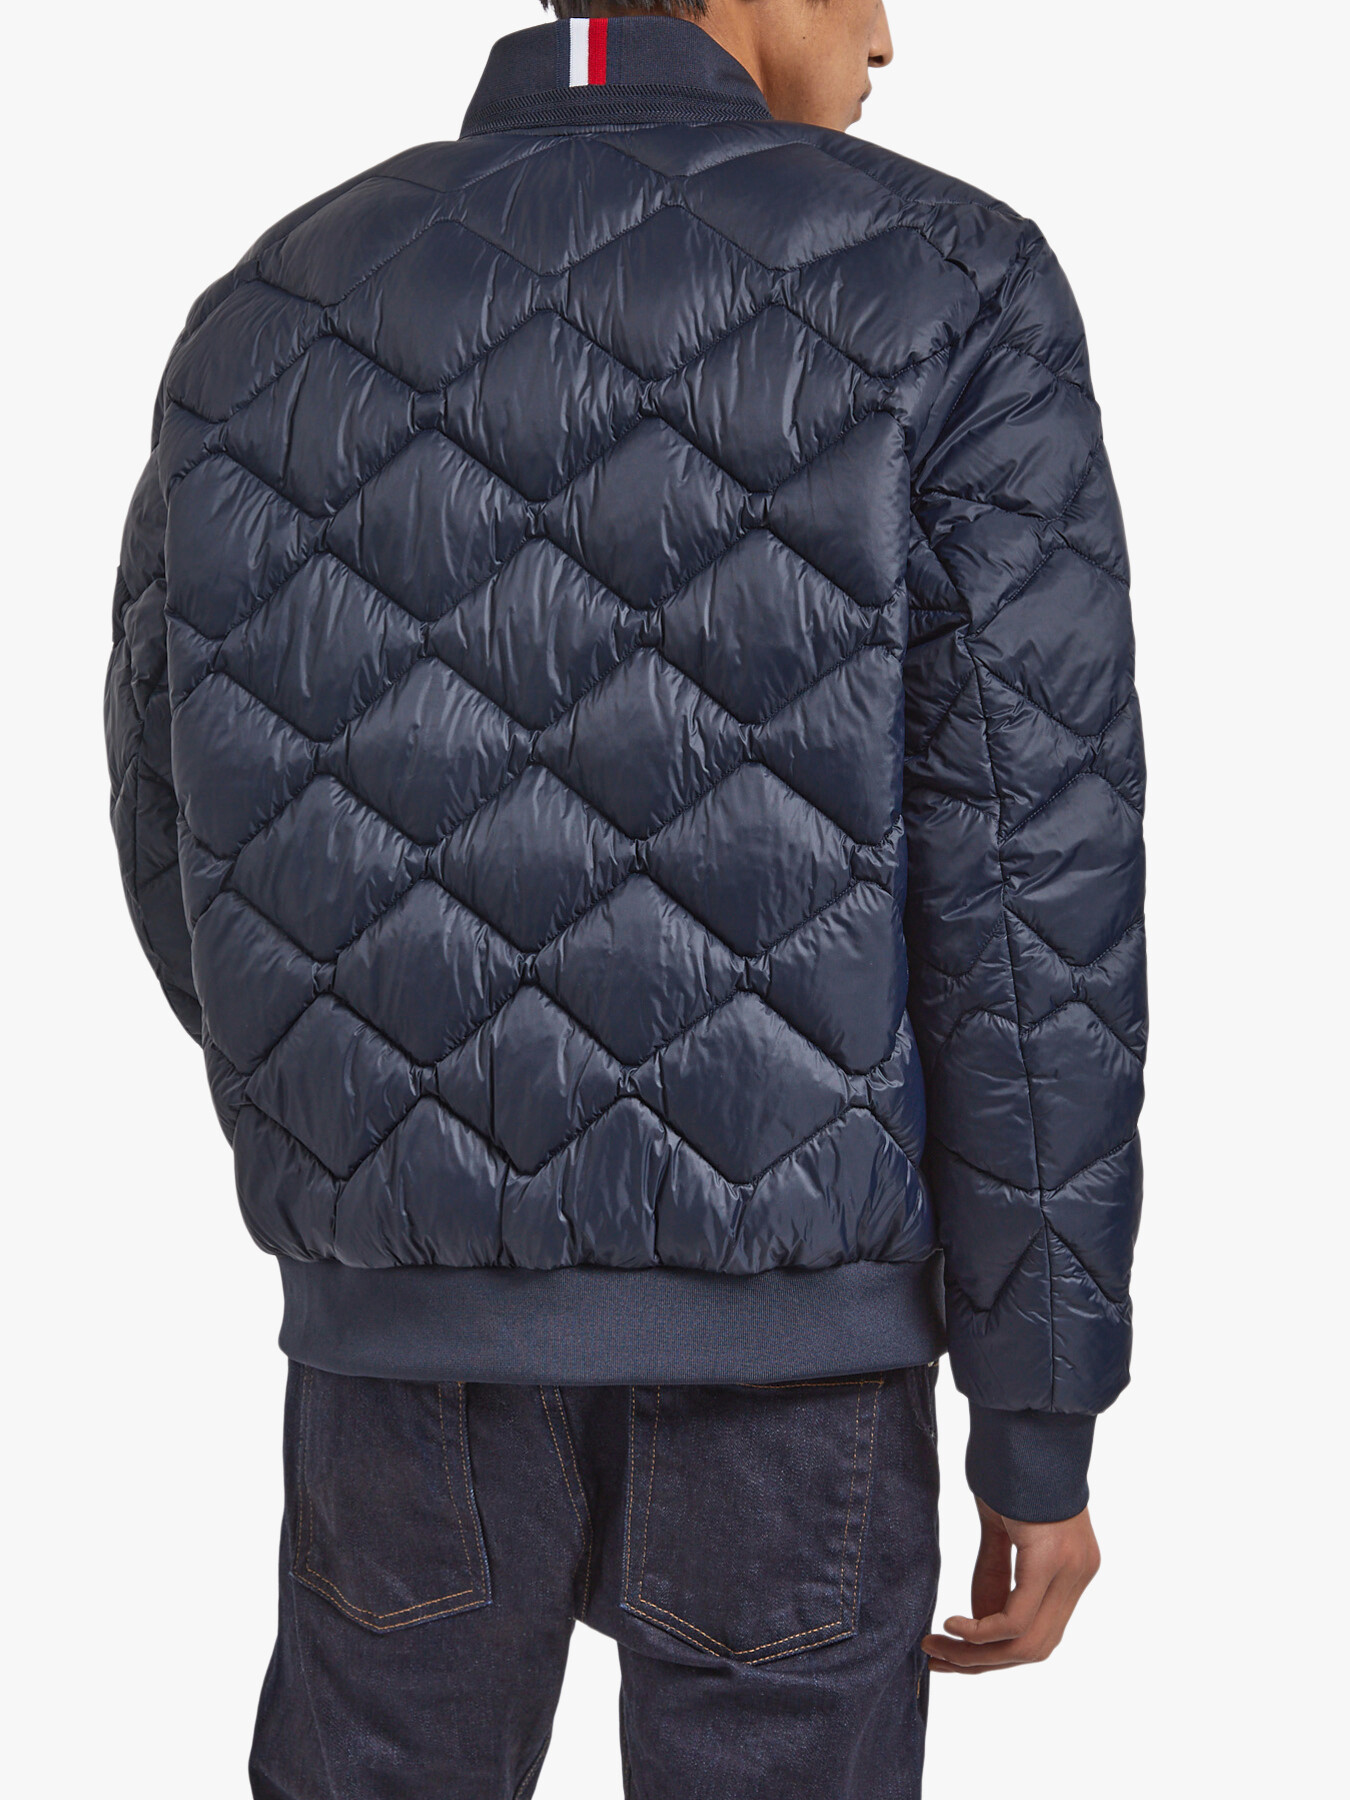 Tommy Hilfiger Quilted Bomber Jacket, Quilted Jackets